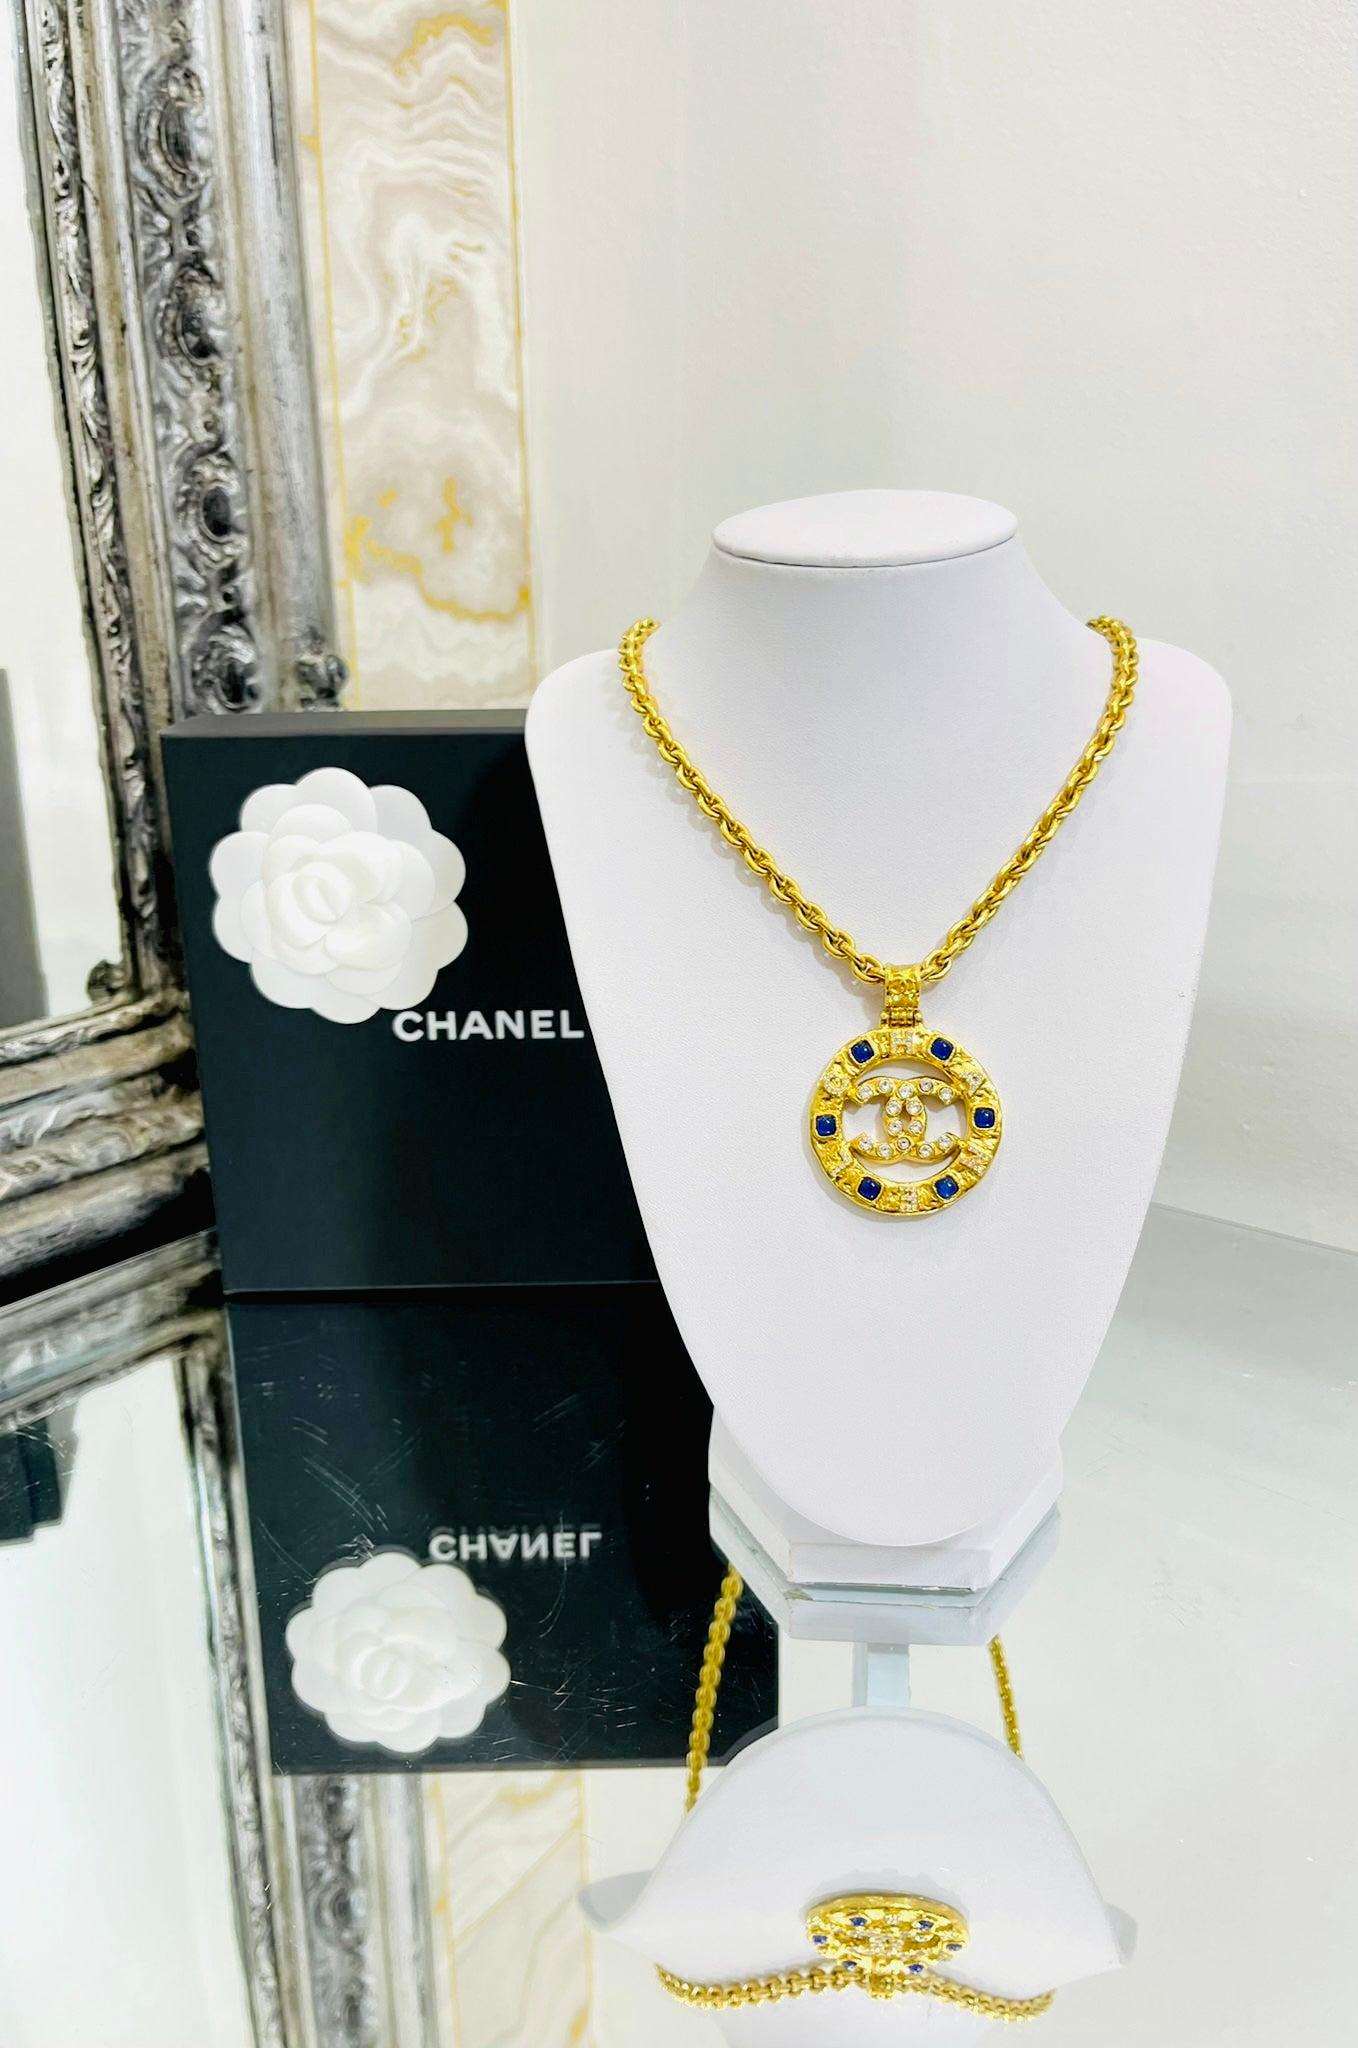 Chanel Gripiox & Crystal Medallion Necklace

Gold medallion with blue gripoix, 'Chanel' in crystal 

and a large centred 'CC' logo also in crystal. On a gold

link chain with dangle 'CC' logo to closure. From 2020 

collection.

Size -